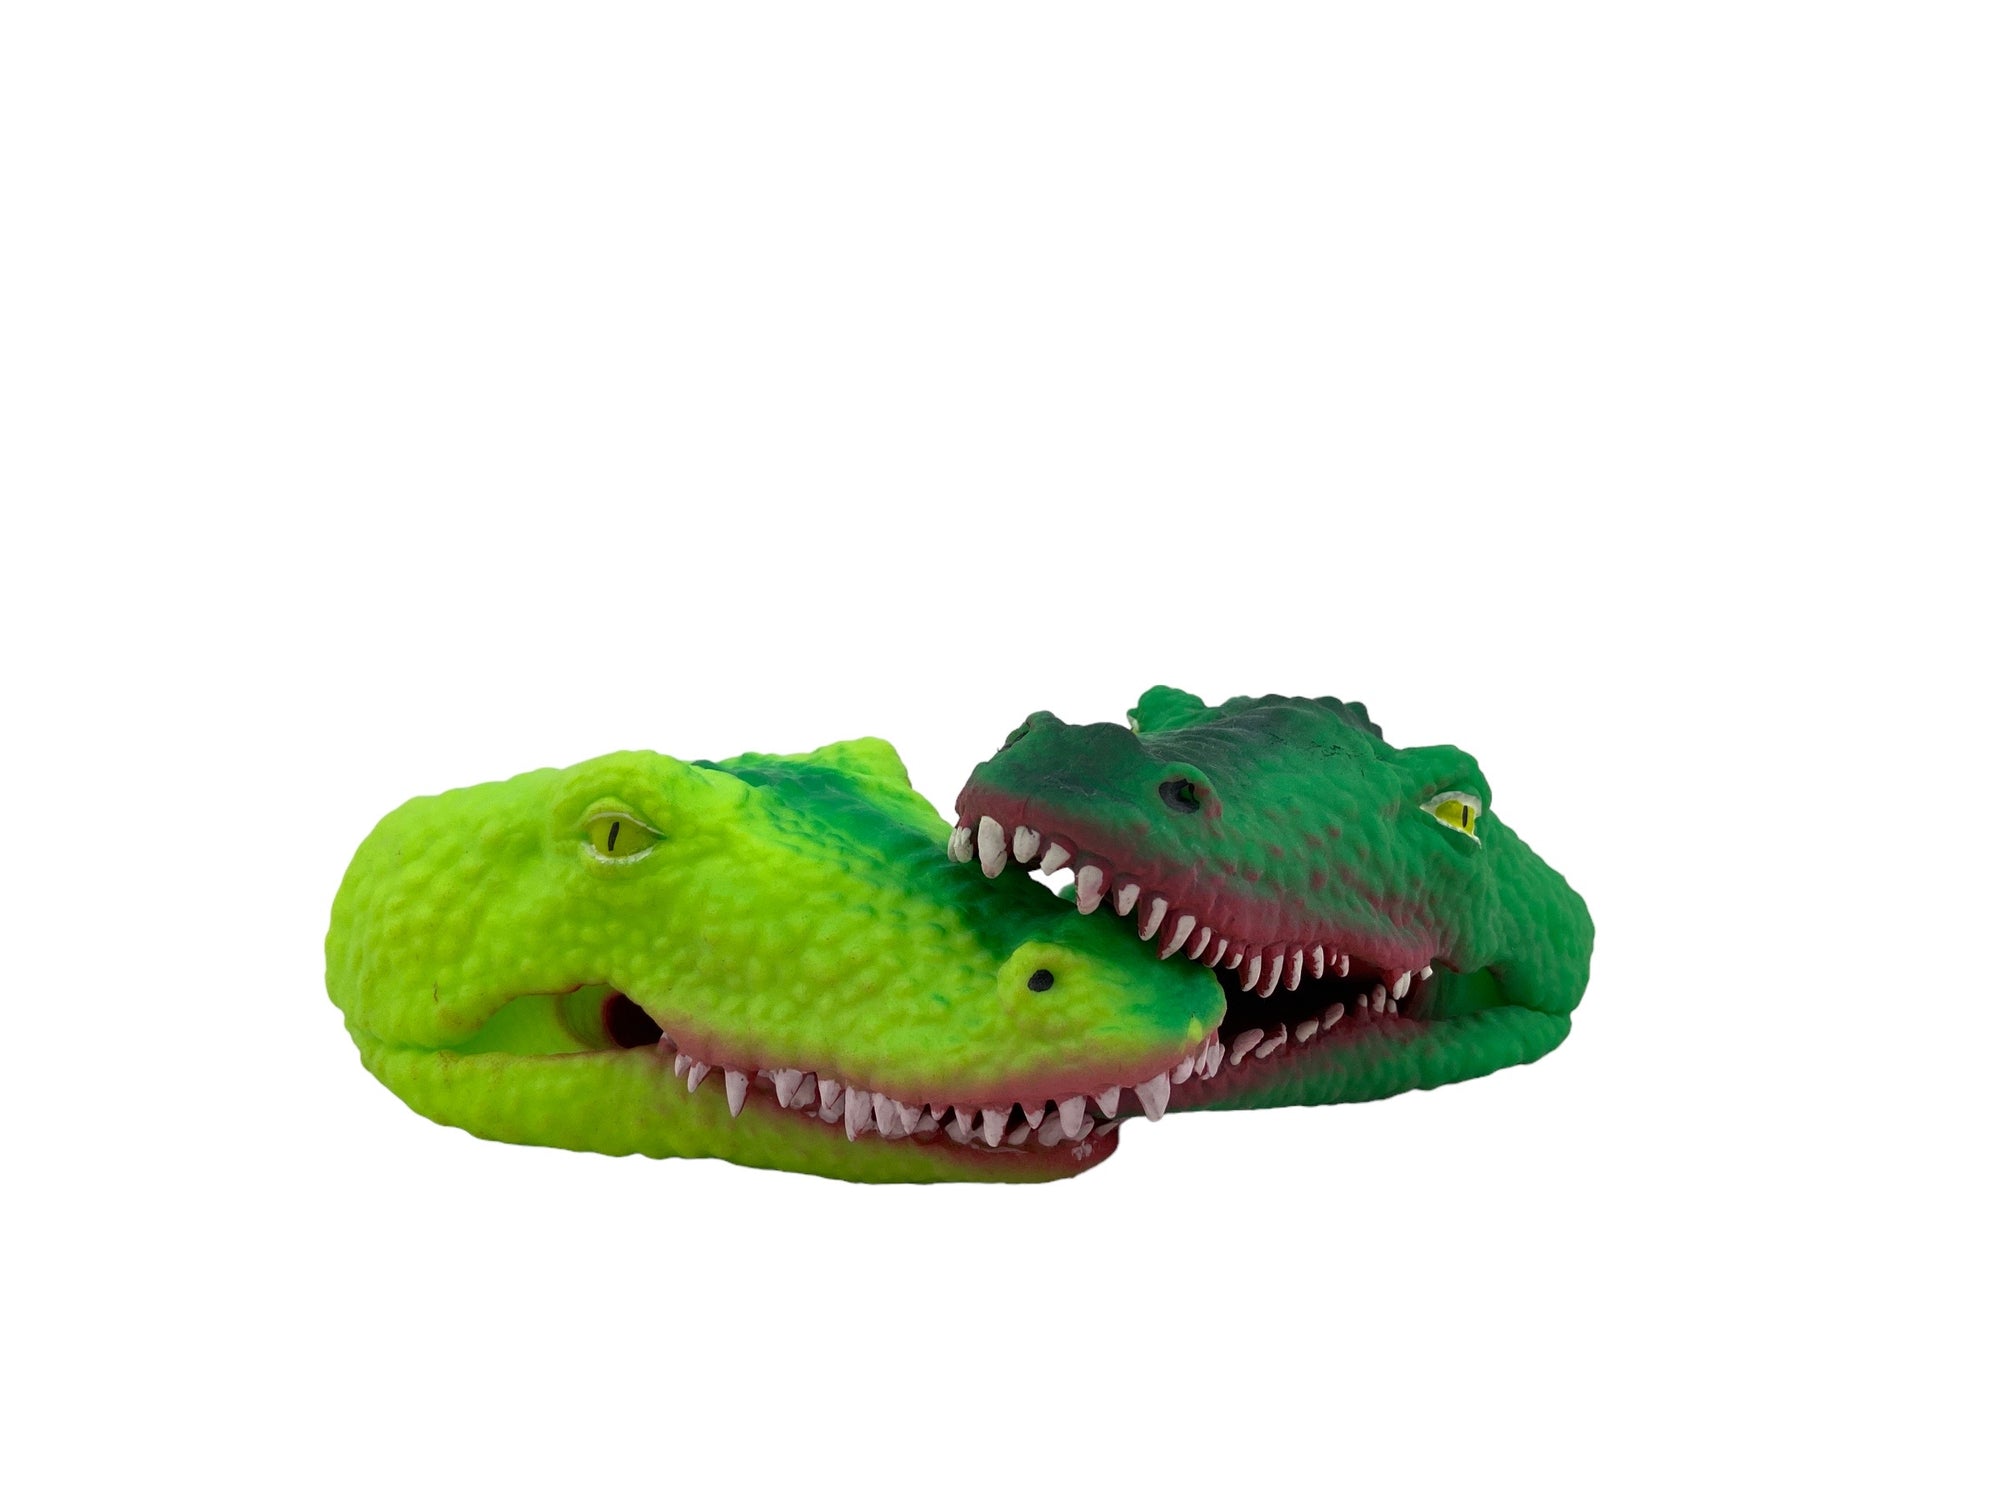 two Alive Hand Puppet - Crocodiles sitting next to each other on a white background